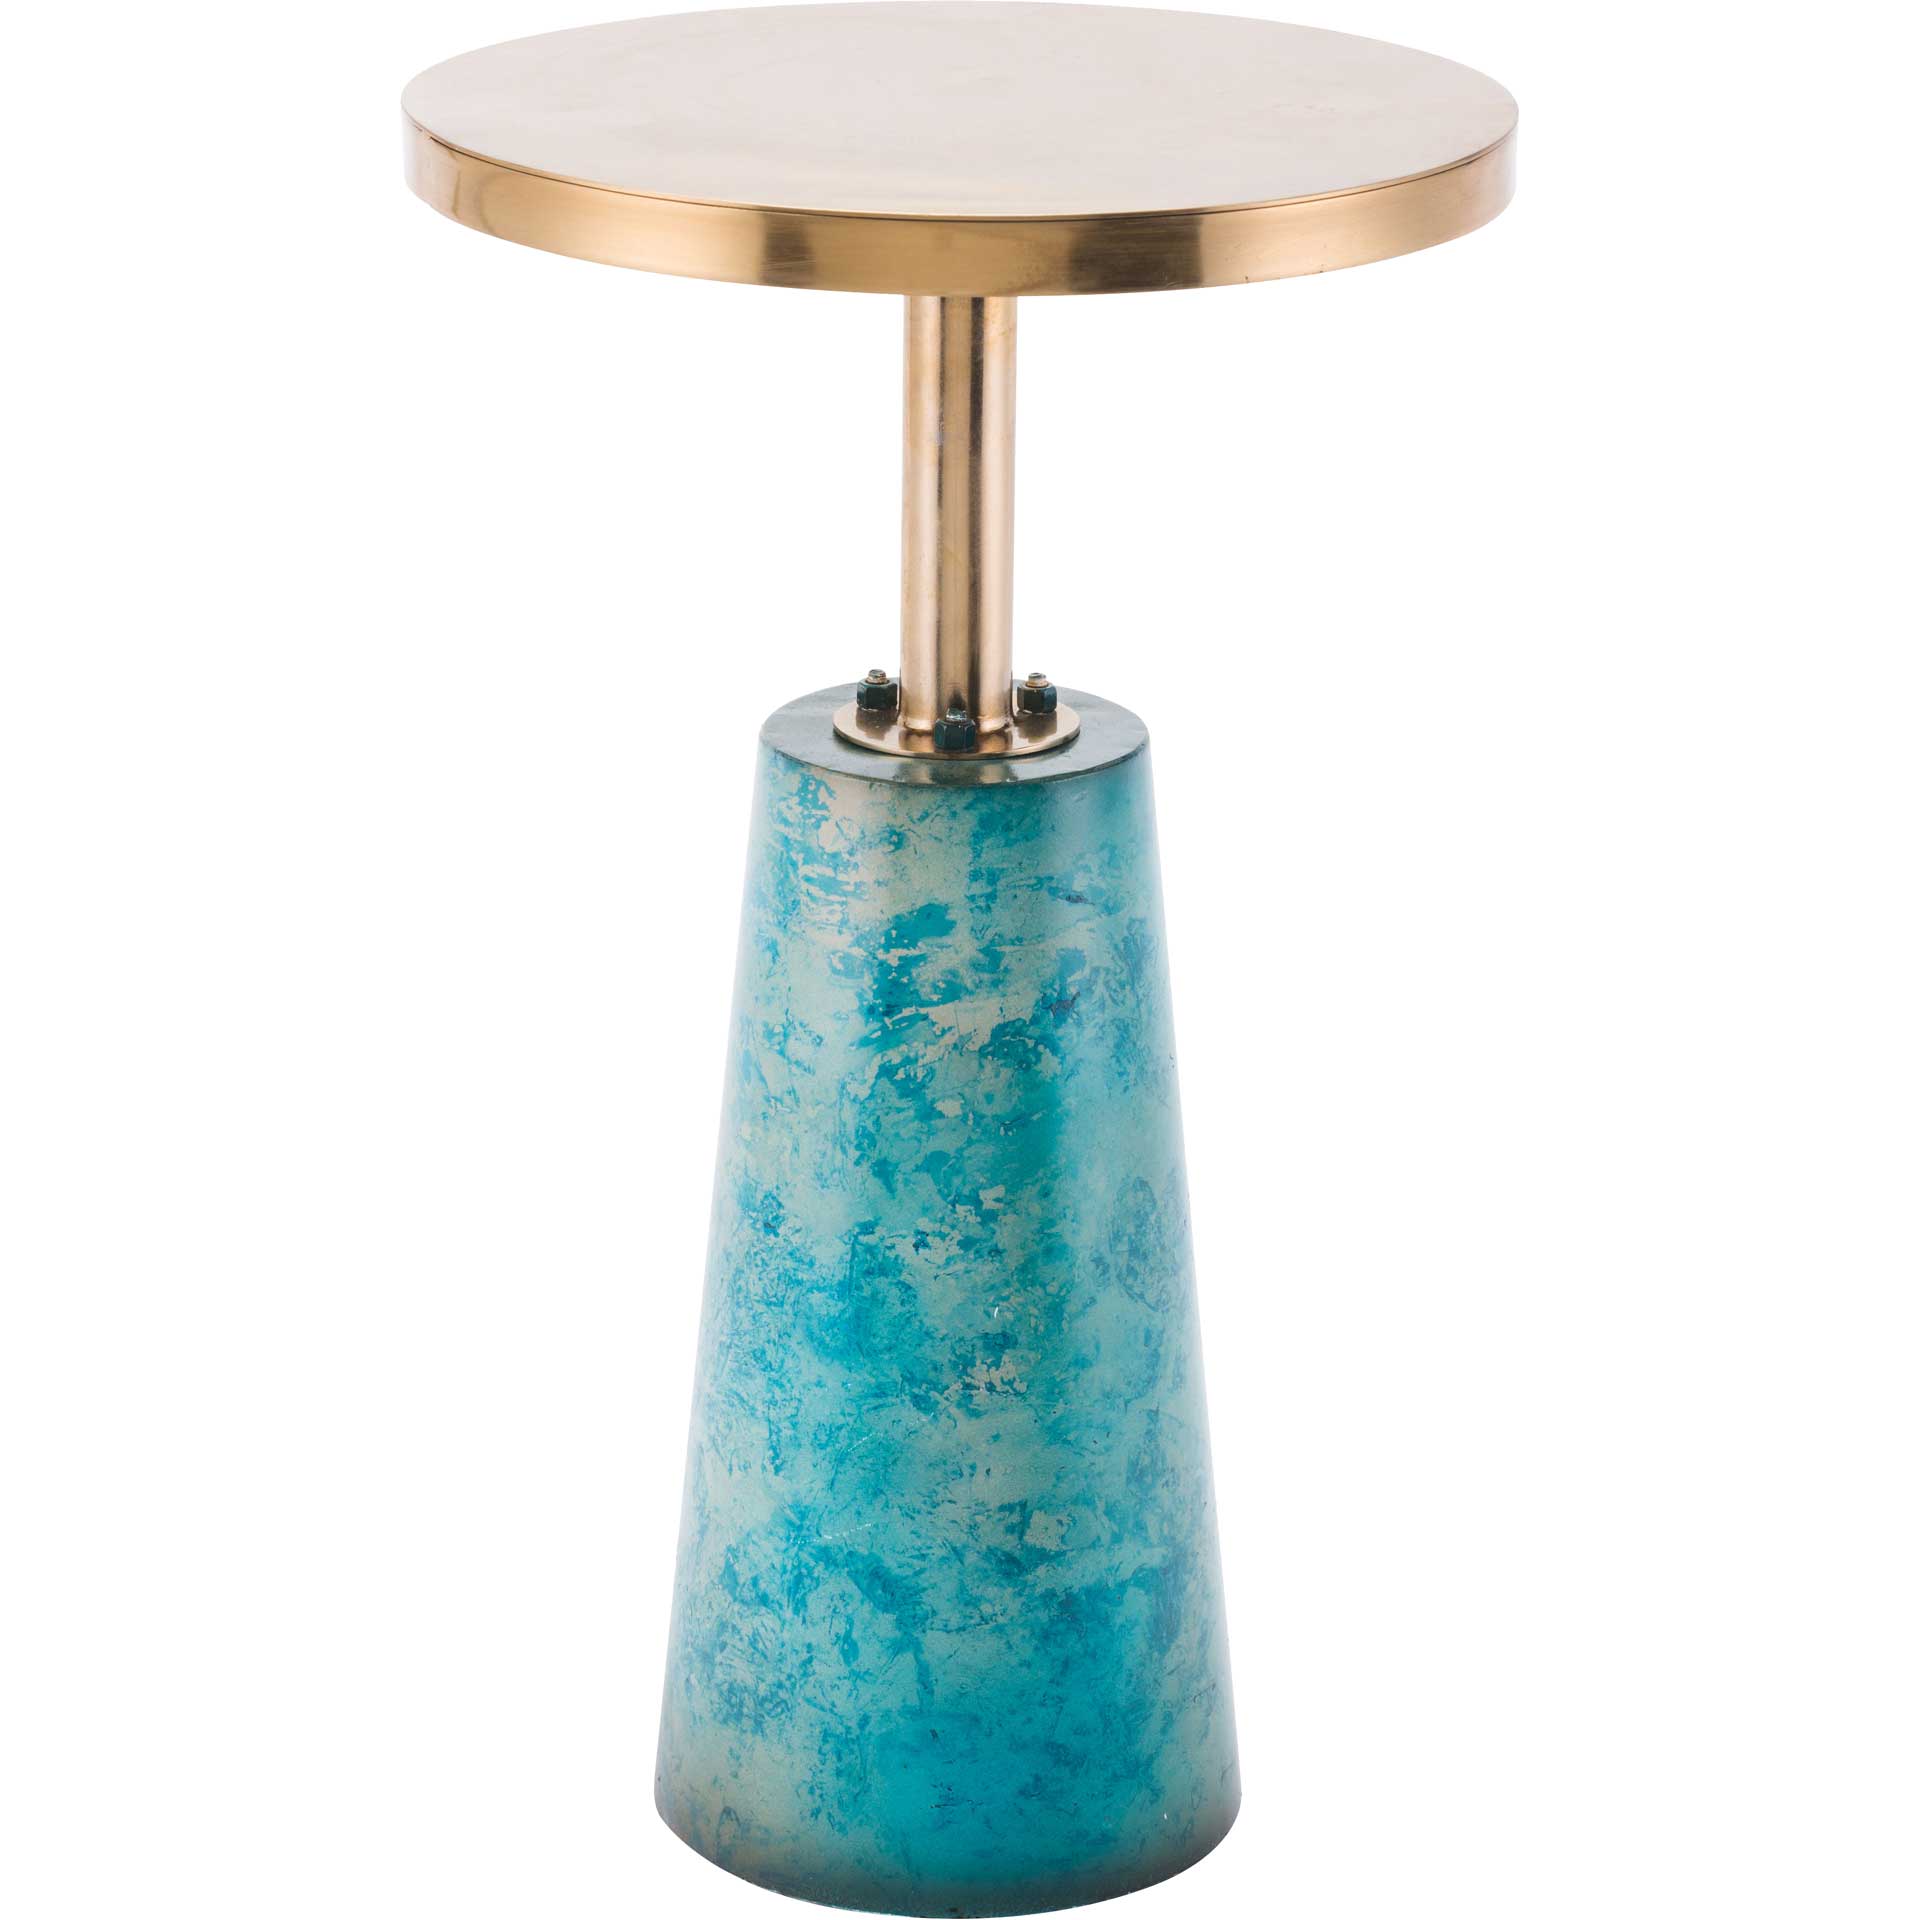 Zaphire End Table Teal